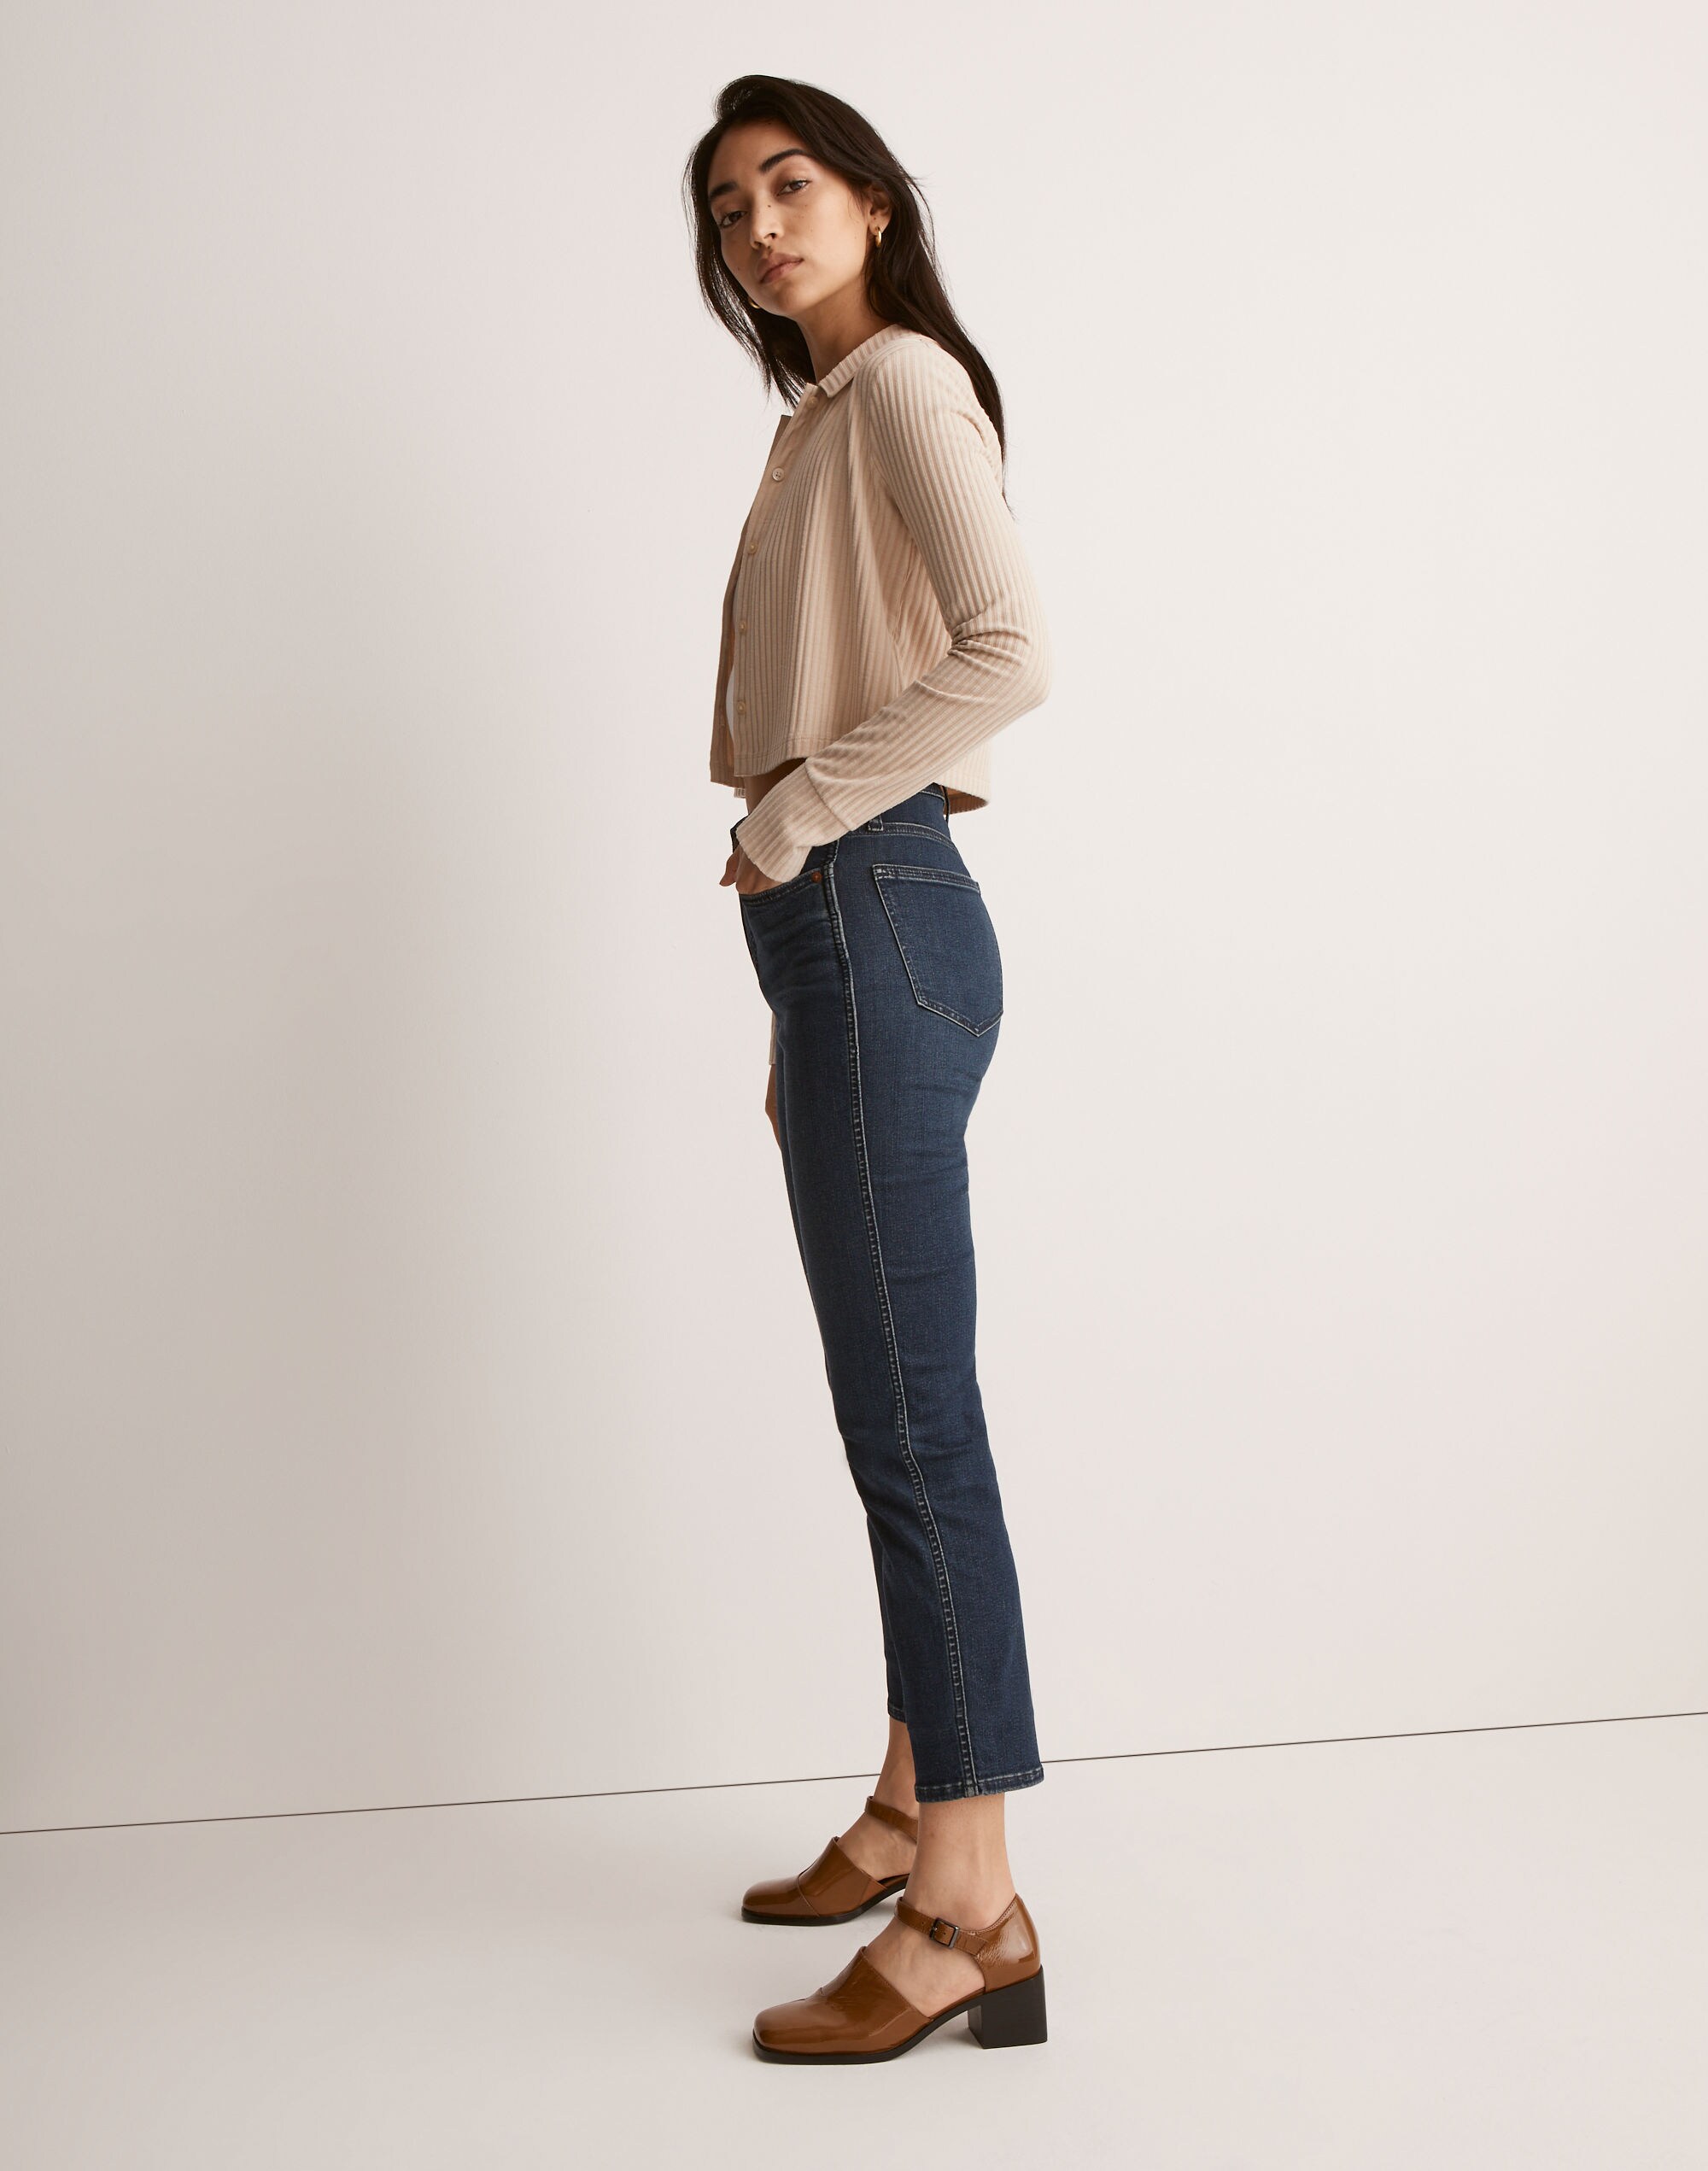 Mid-Rise Stovepipe Jeans in Dahill Wash